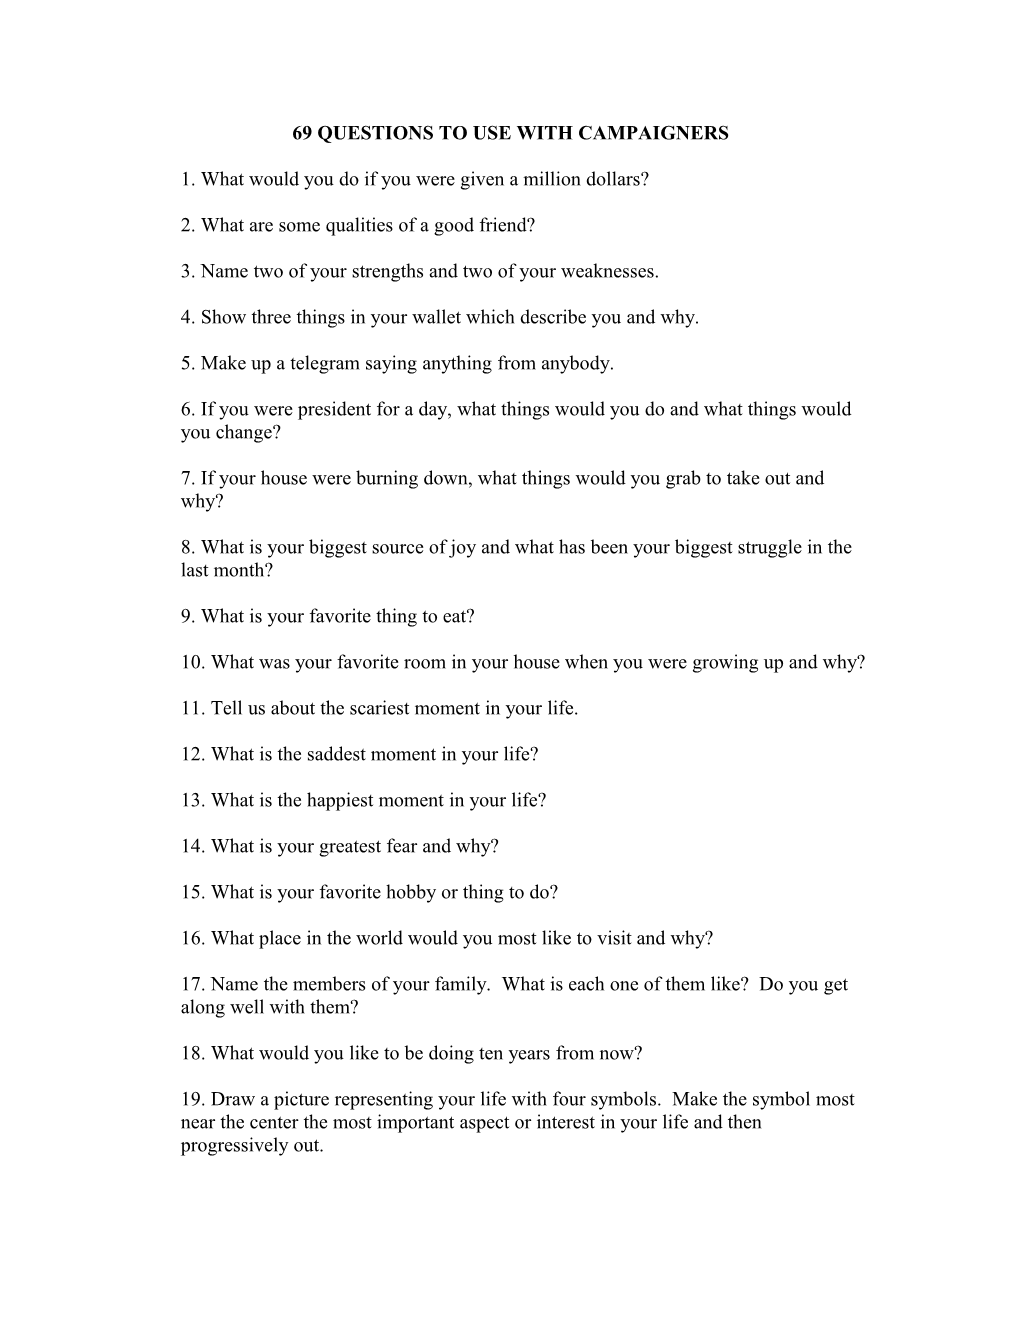 Here Are Some Questions to Use in Campaigners